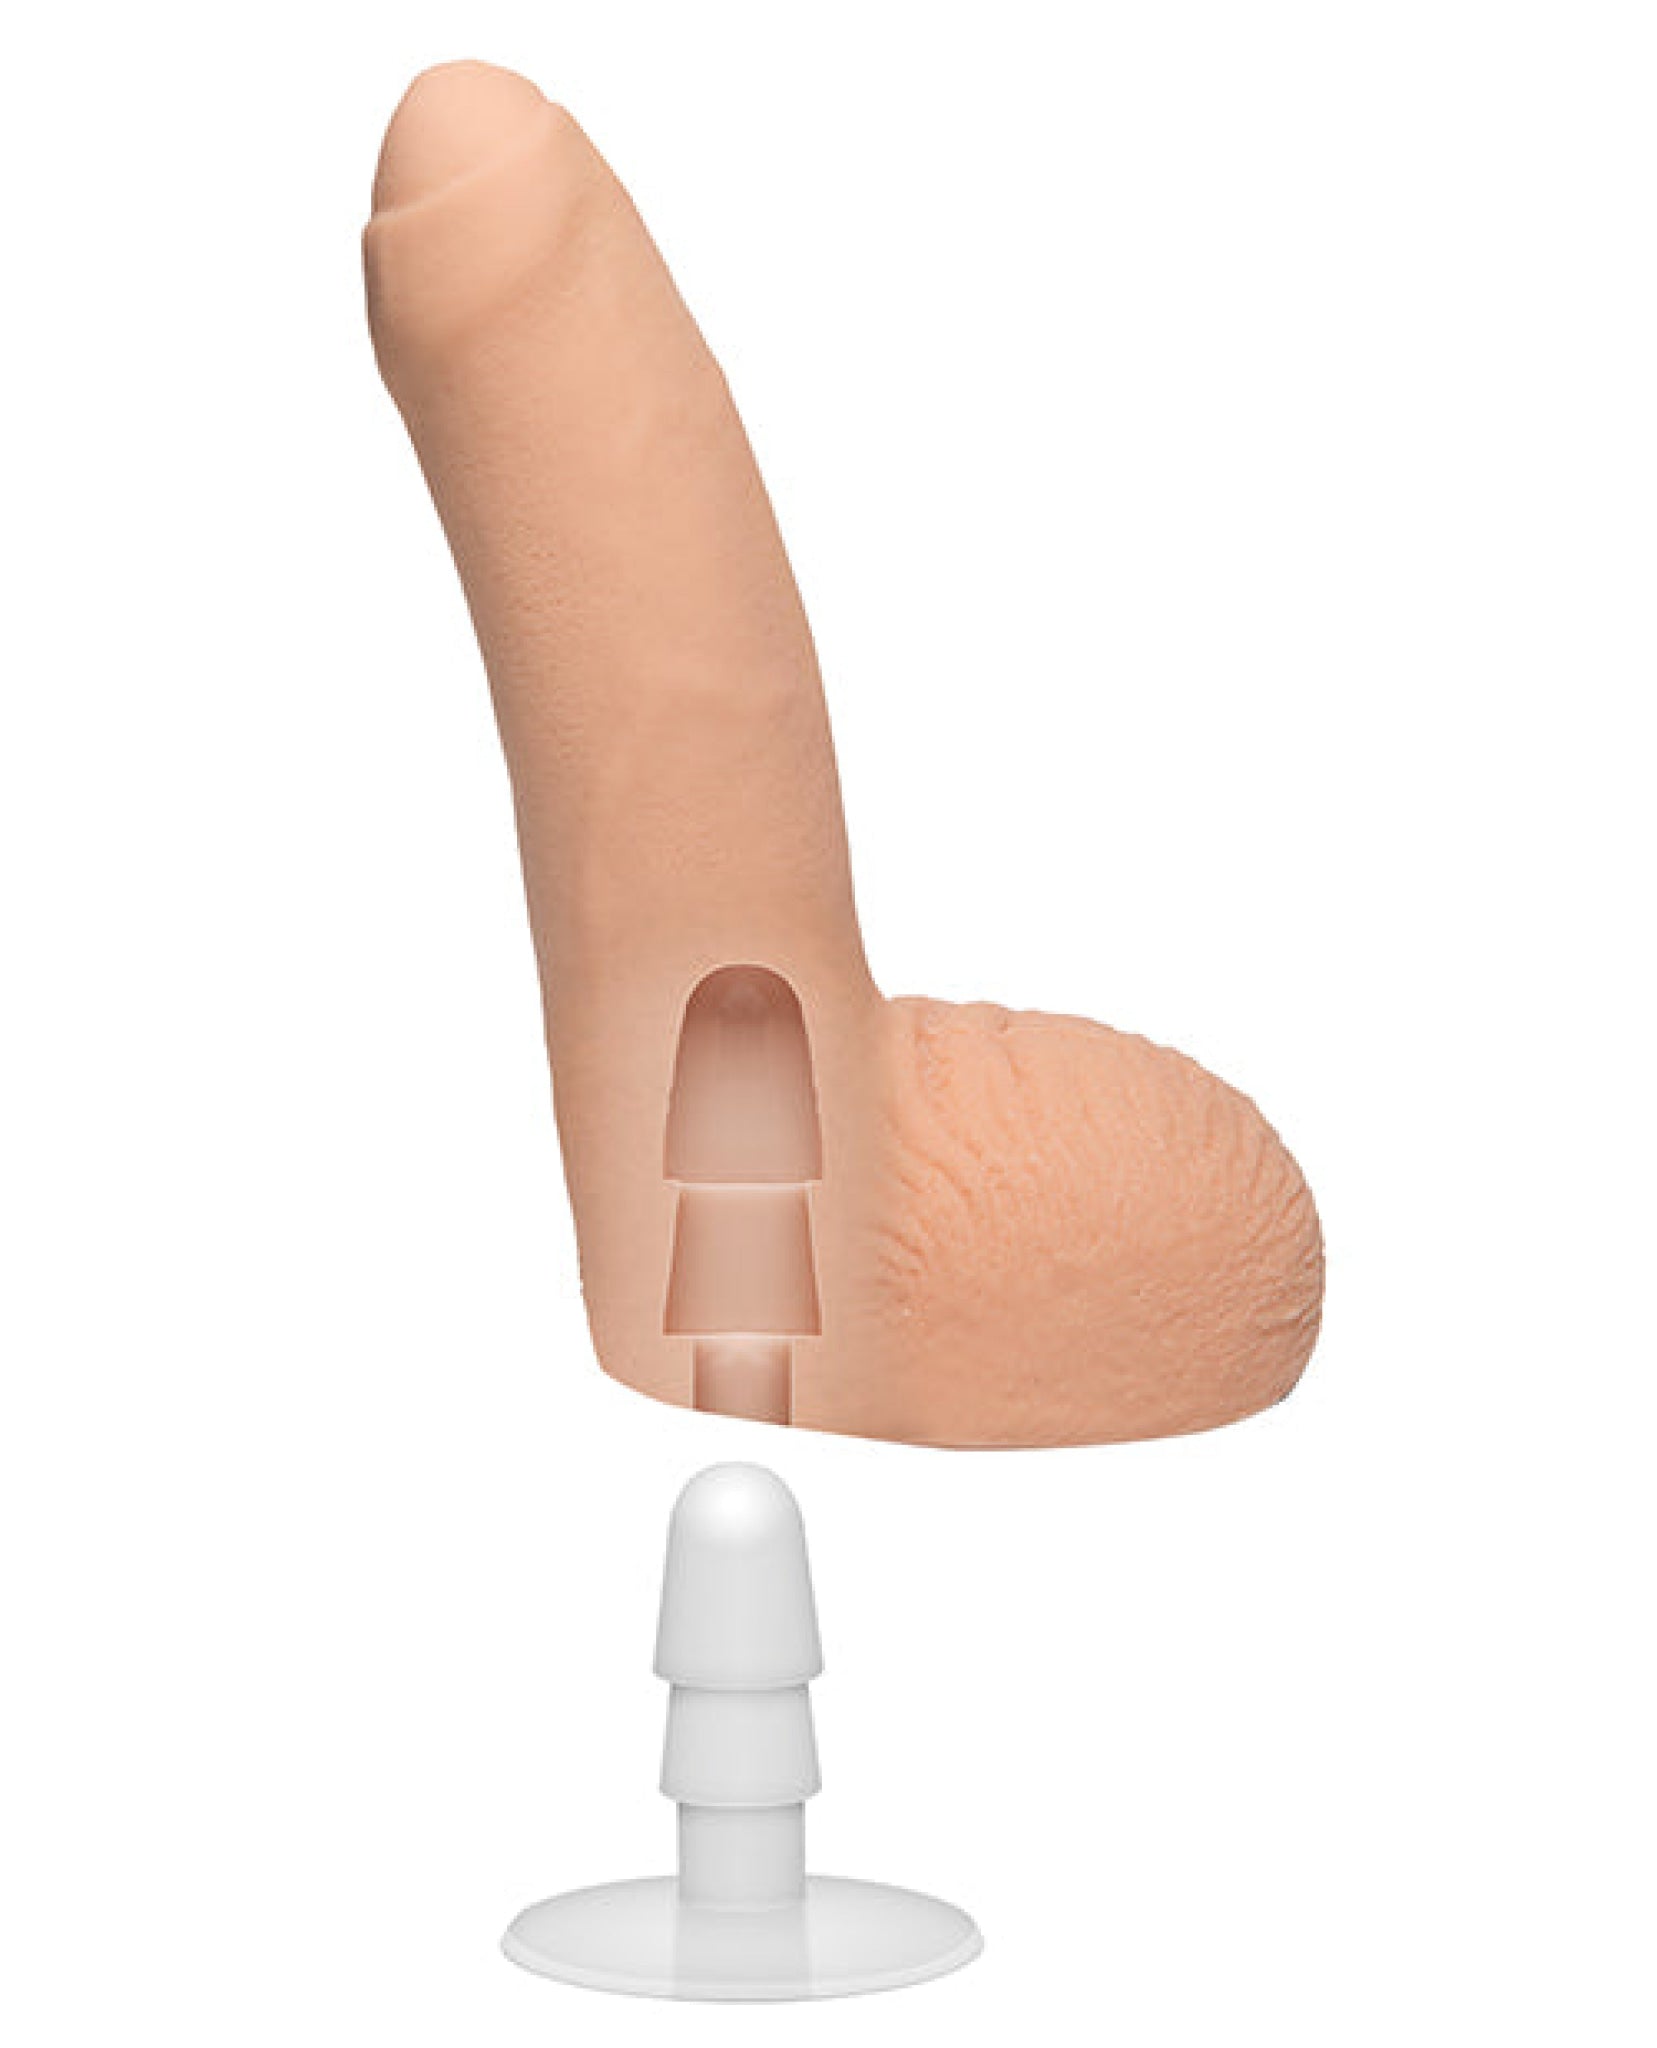 Signature Cocks Ultraskyn 8" Cock W-removeable Vac-u-lock Suction Cup - William Seed Doc Johnson